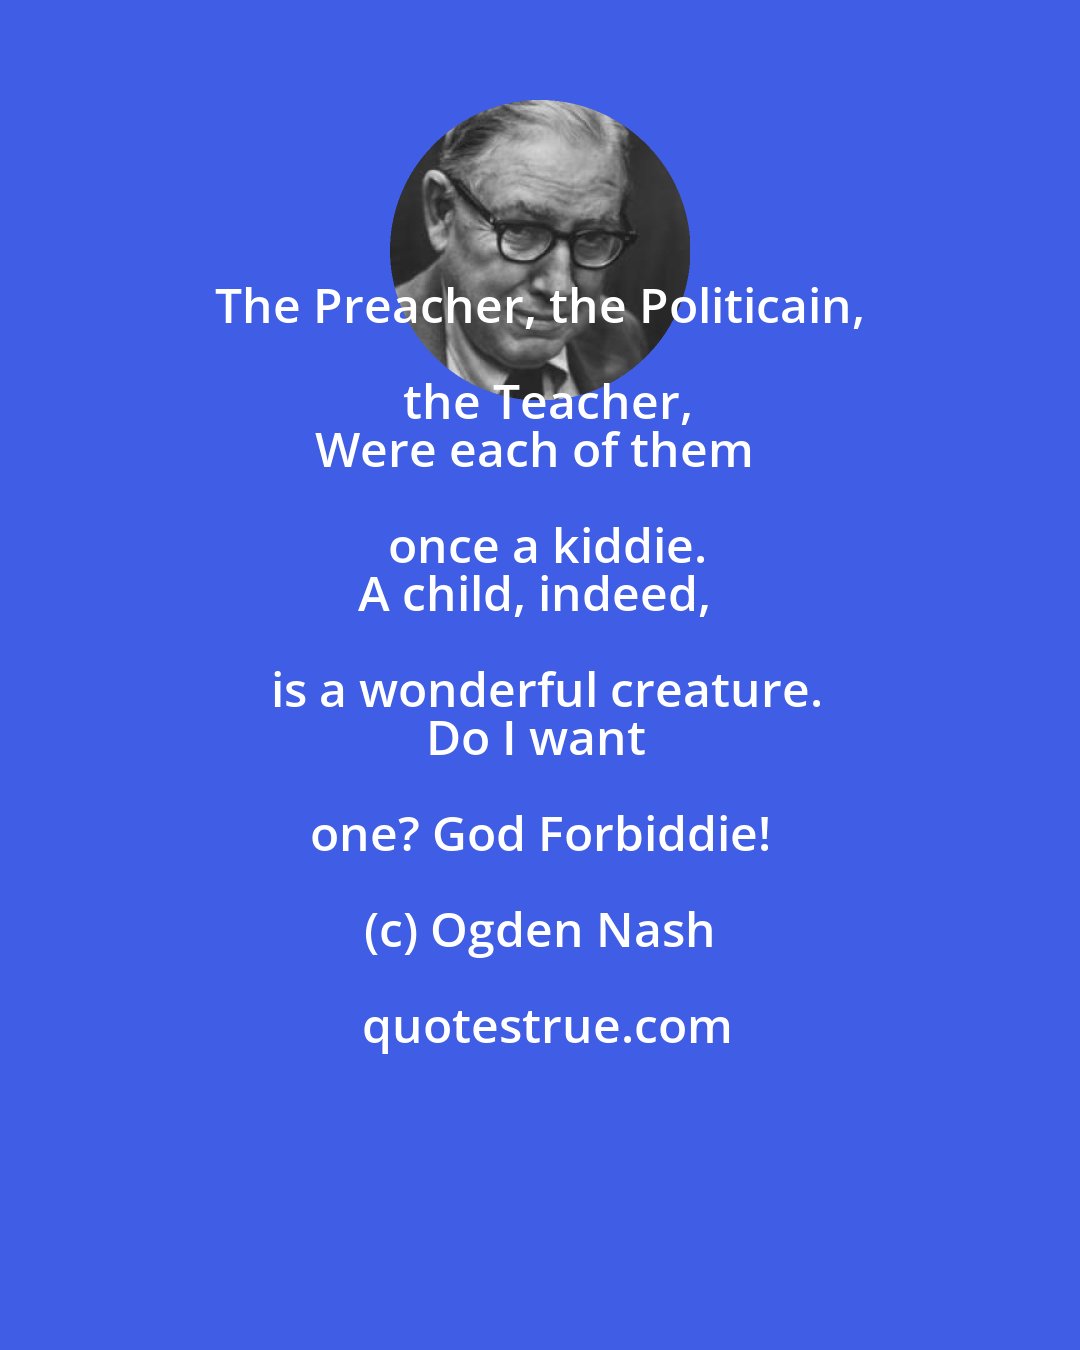 Ogden Nash: The Preacher, the Politicain, the Teacher,
Were each of them once a kiddie.
A child, indeed, is a wonderful creature.
Do I want one? God Forbiddie!